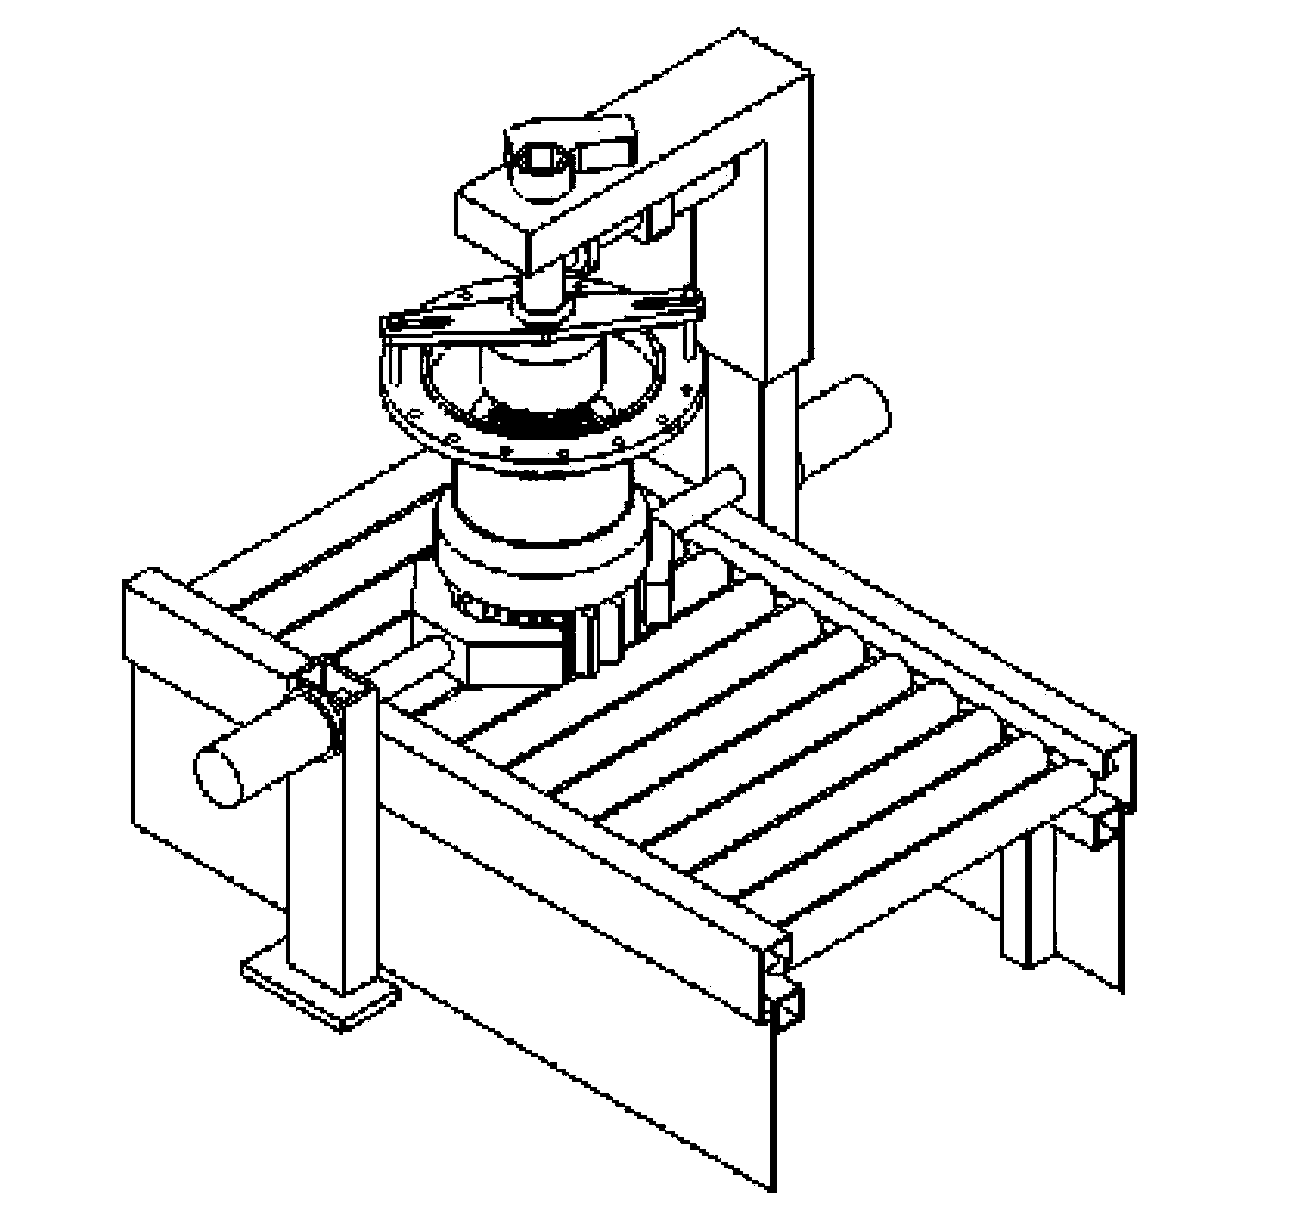 Device for tightening and assembling circular nut on output shaft of planetary gearbox and testing torque